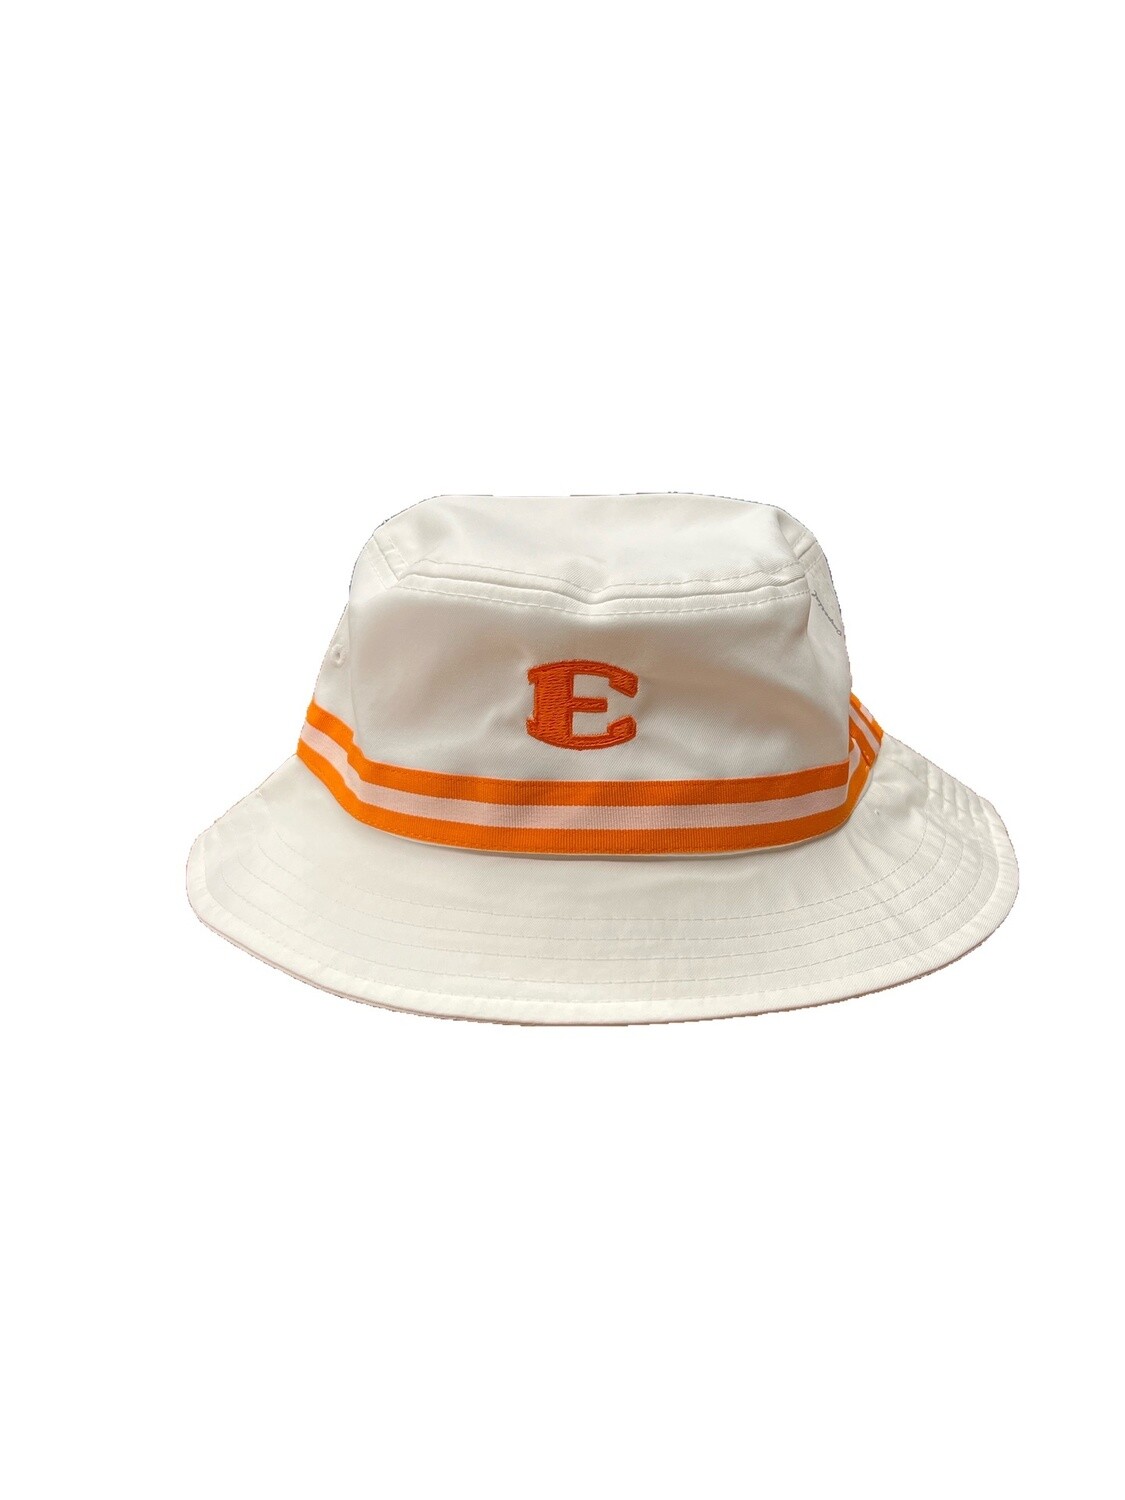 Imperial Oxford Performance Bucket Hat, Size: Adult Medium